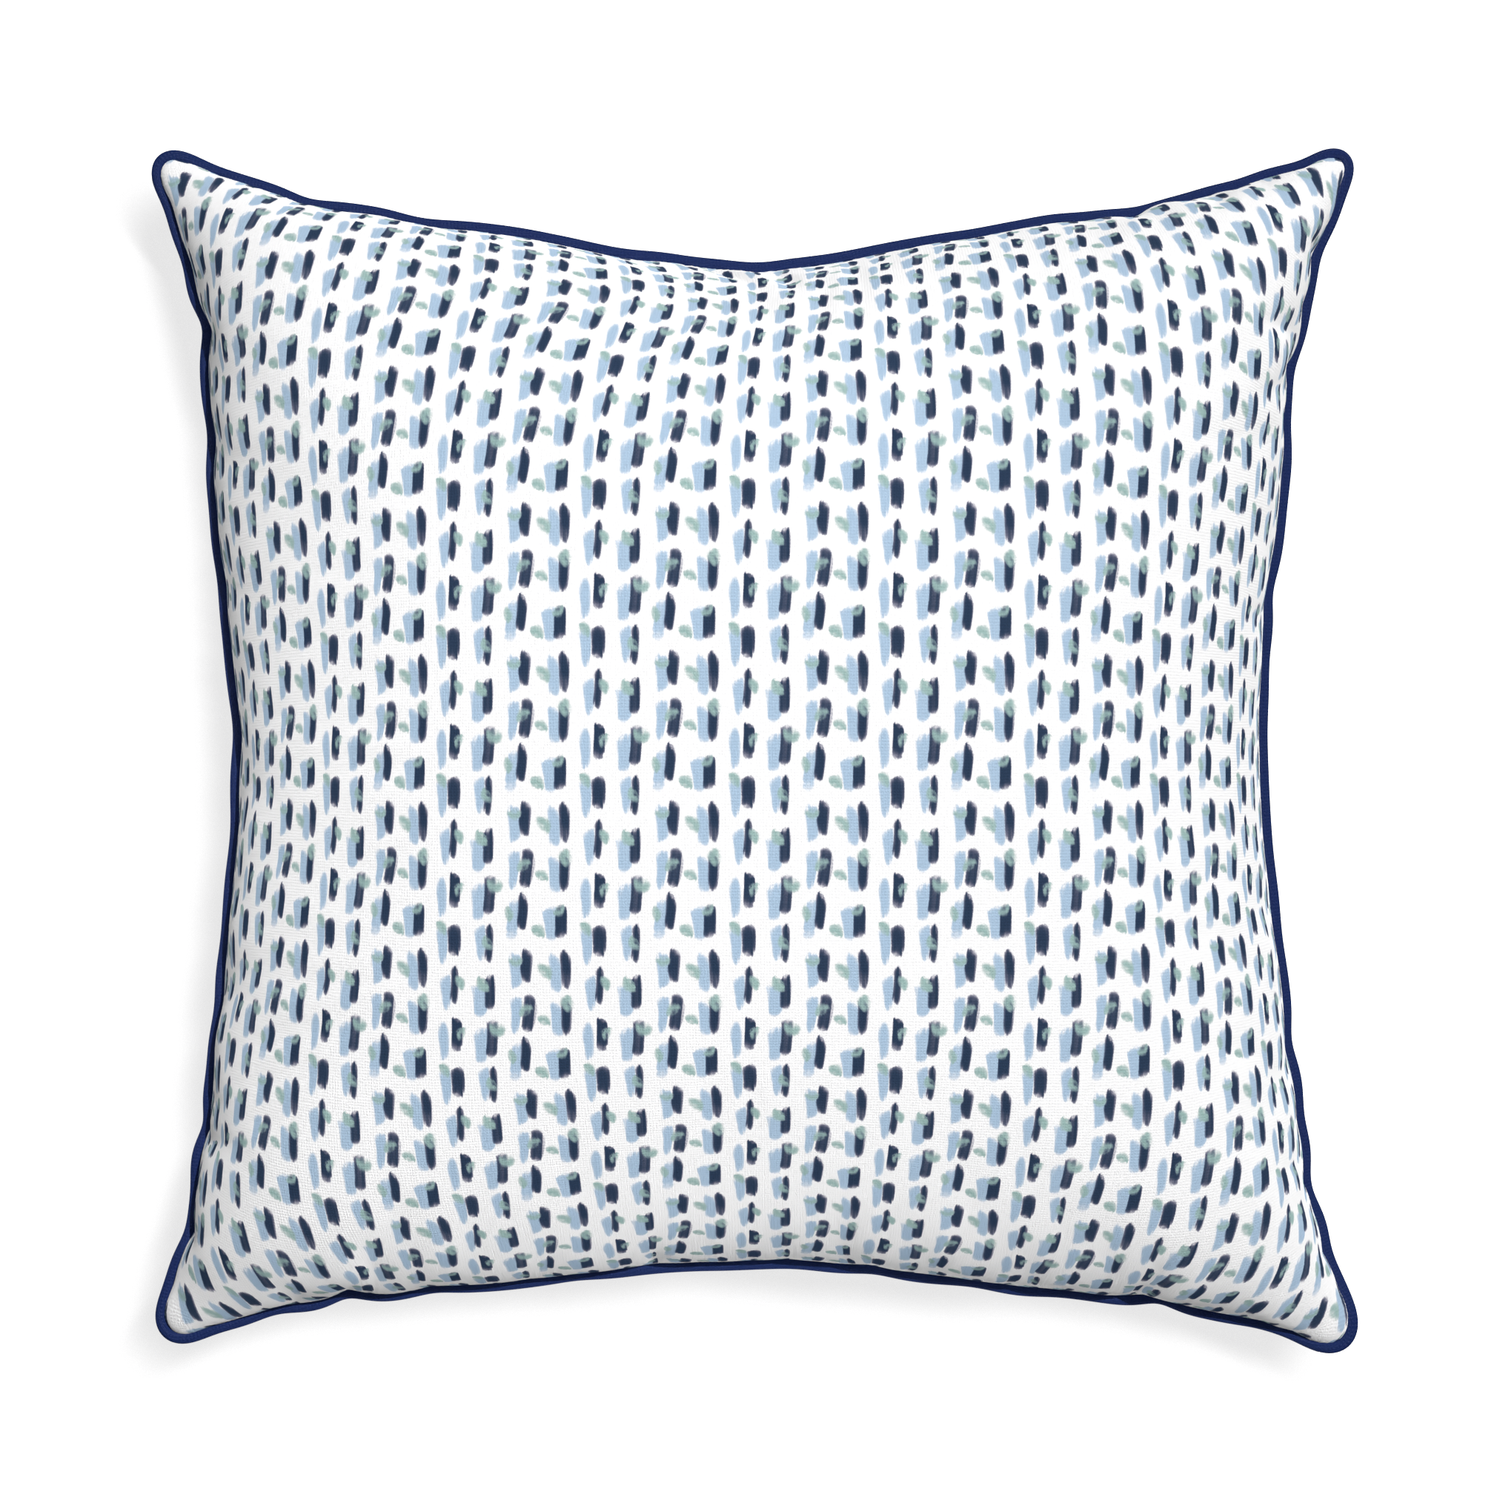 Euro-sham poppy blue custom pillow with midnight piping on white background